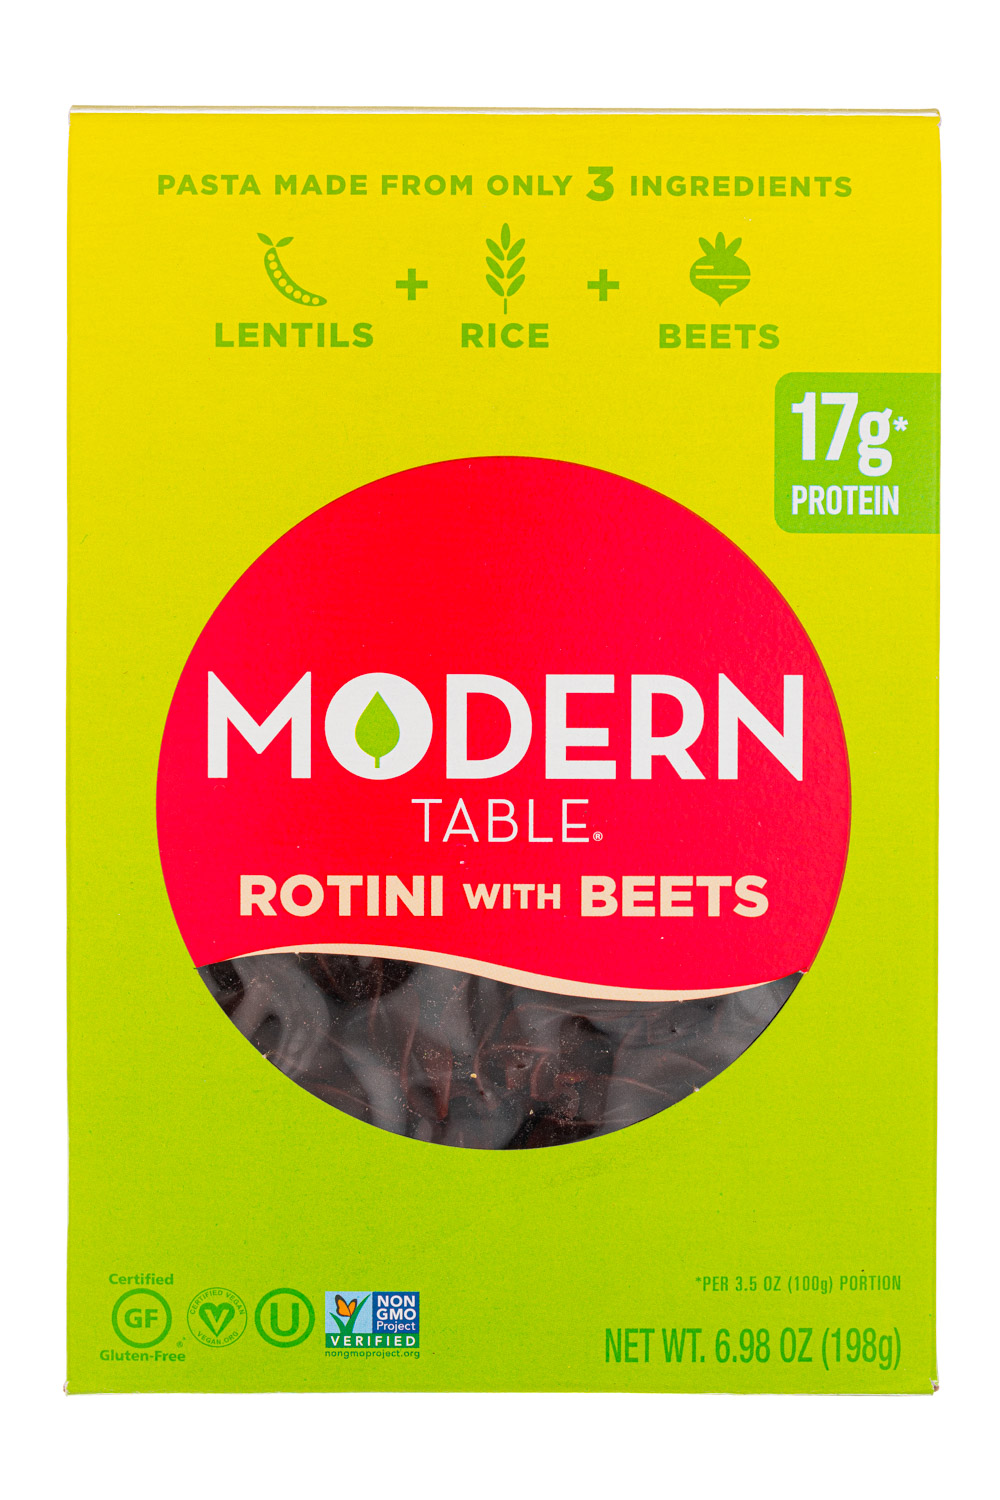 Rotini with Beets 2019